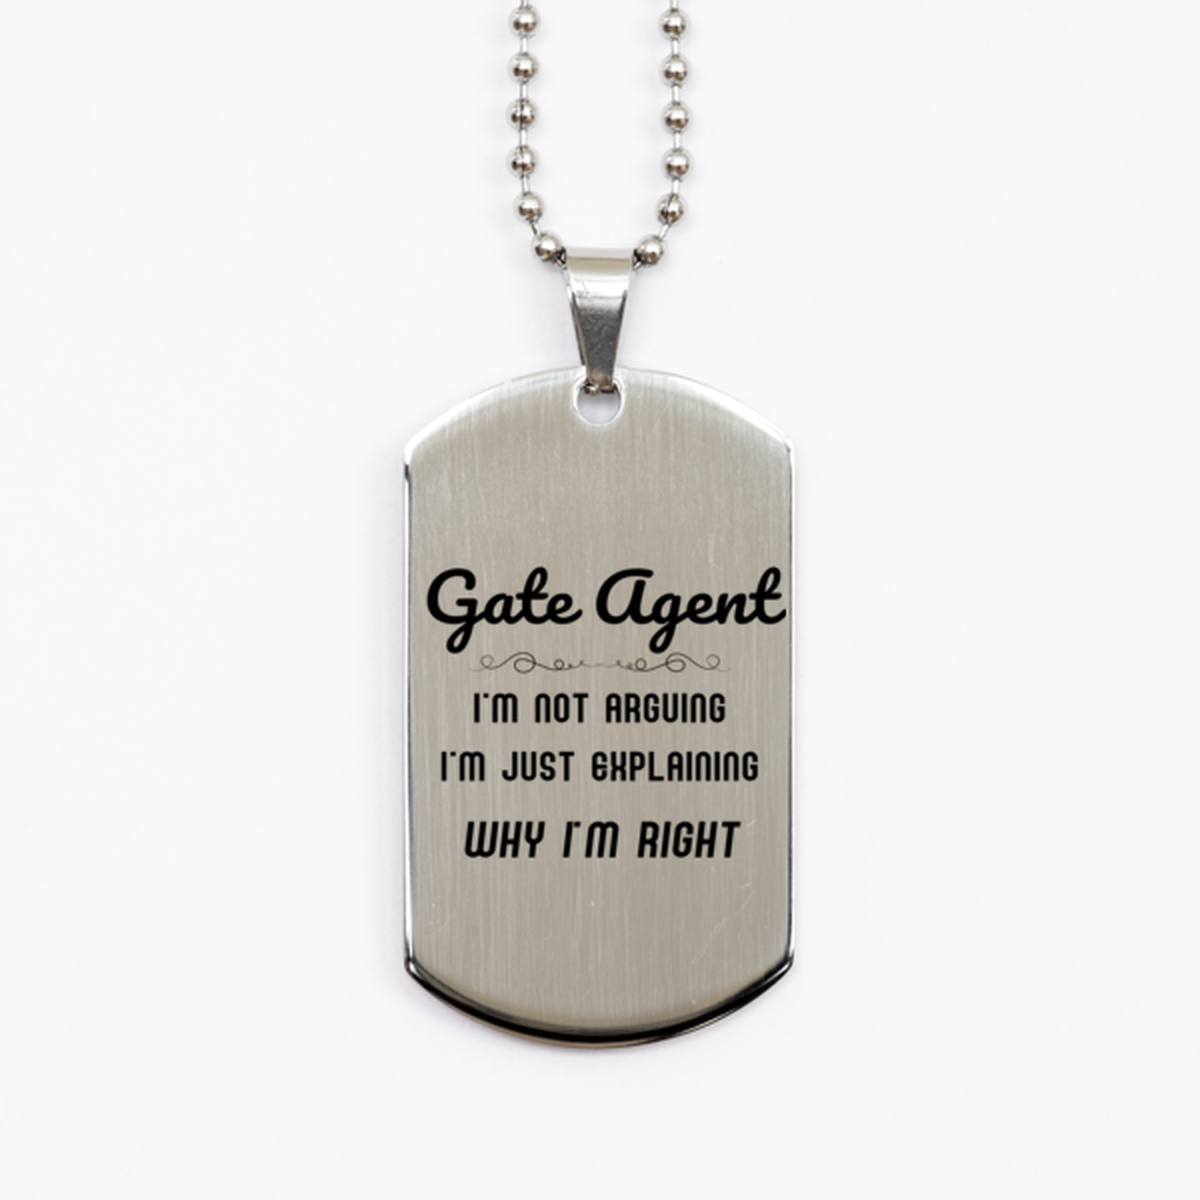 Gate Agent I'm not Arguing. I'm Just Explaining Why I'm RIGHT Silver Dog Tag, Funny Saying Quote Gate Agent Gifts For Gate Agent Graduation Birthday Christmas Gifts for Men Women Coworker